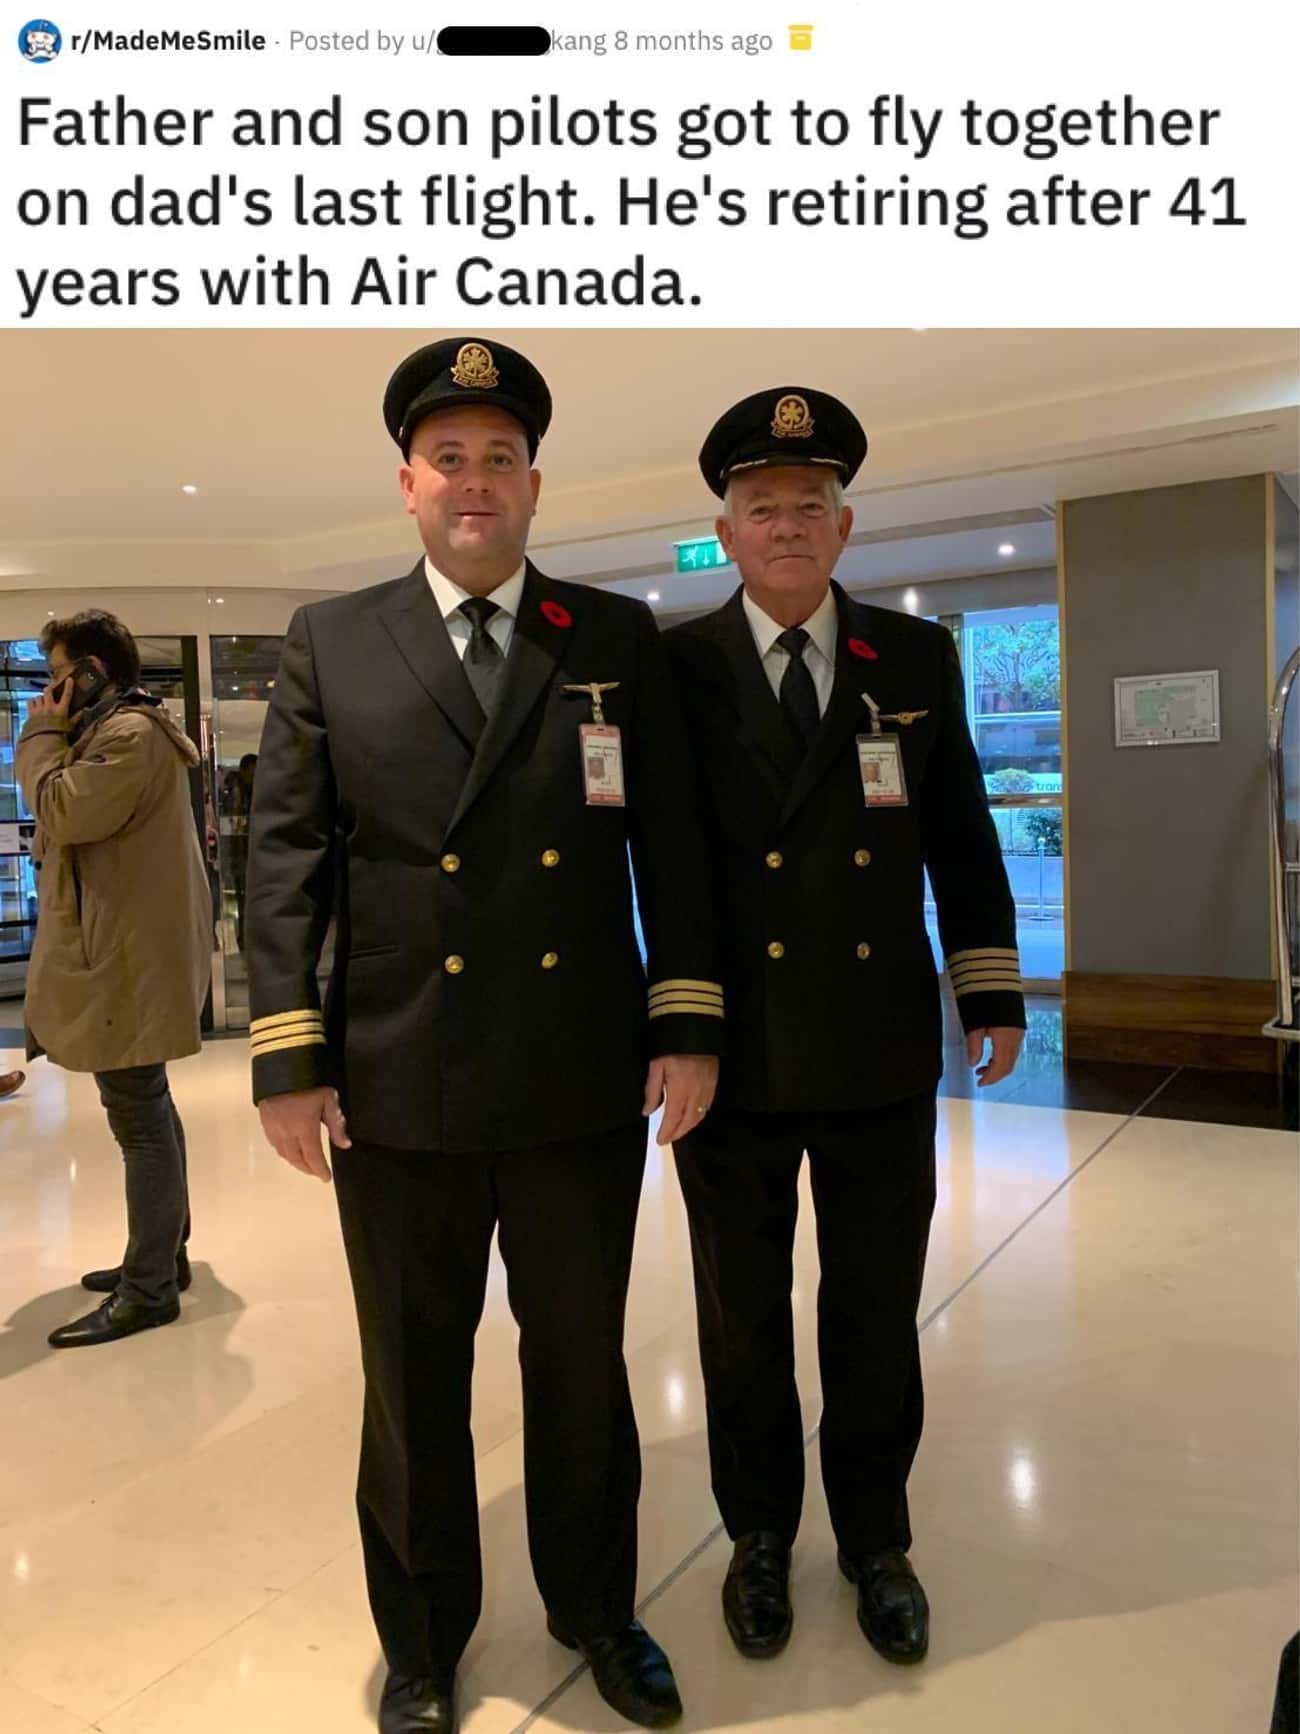 Father Son Pilots, Eh